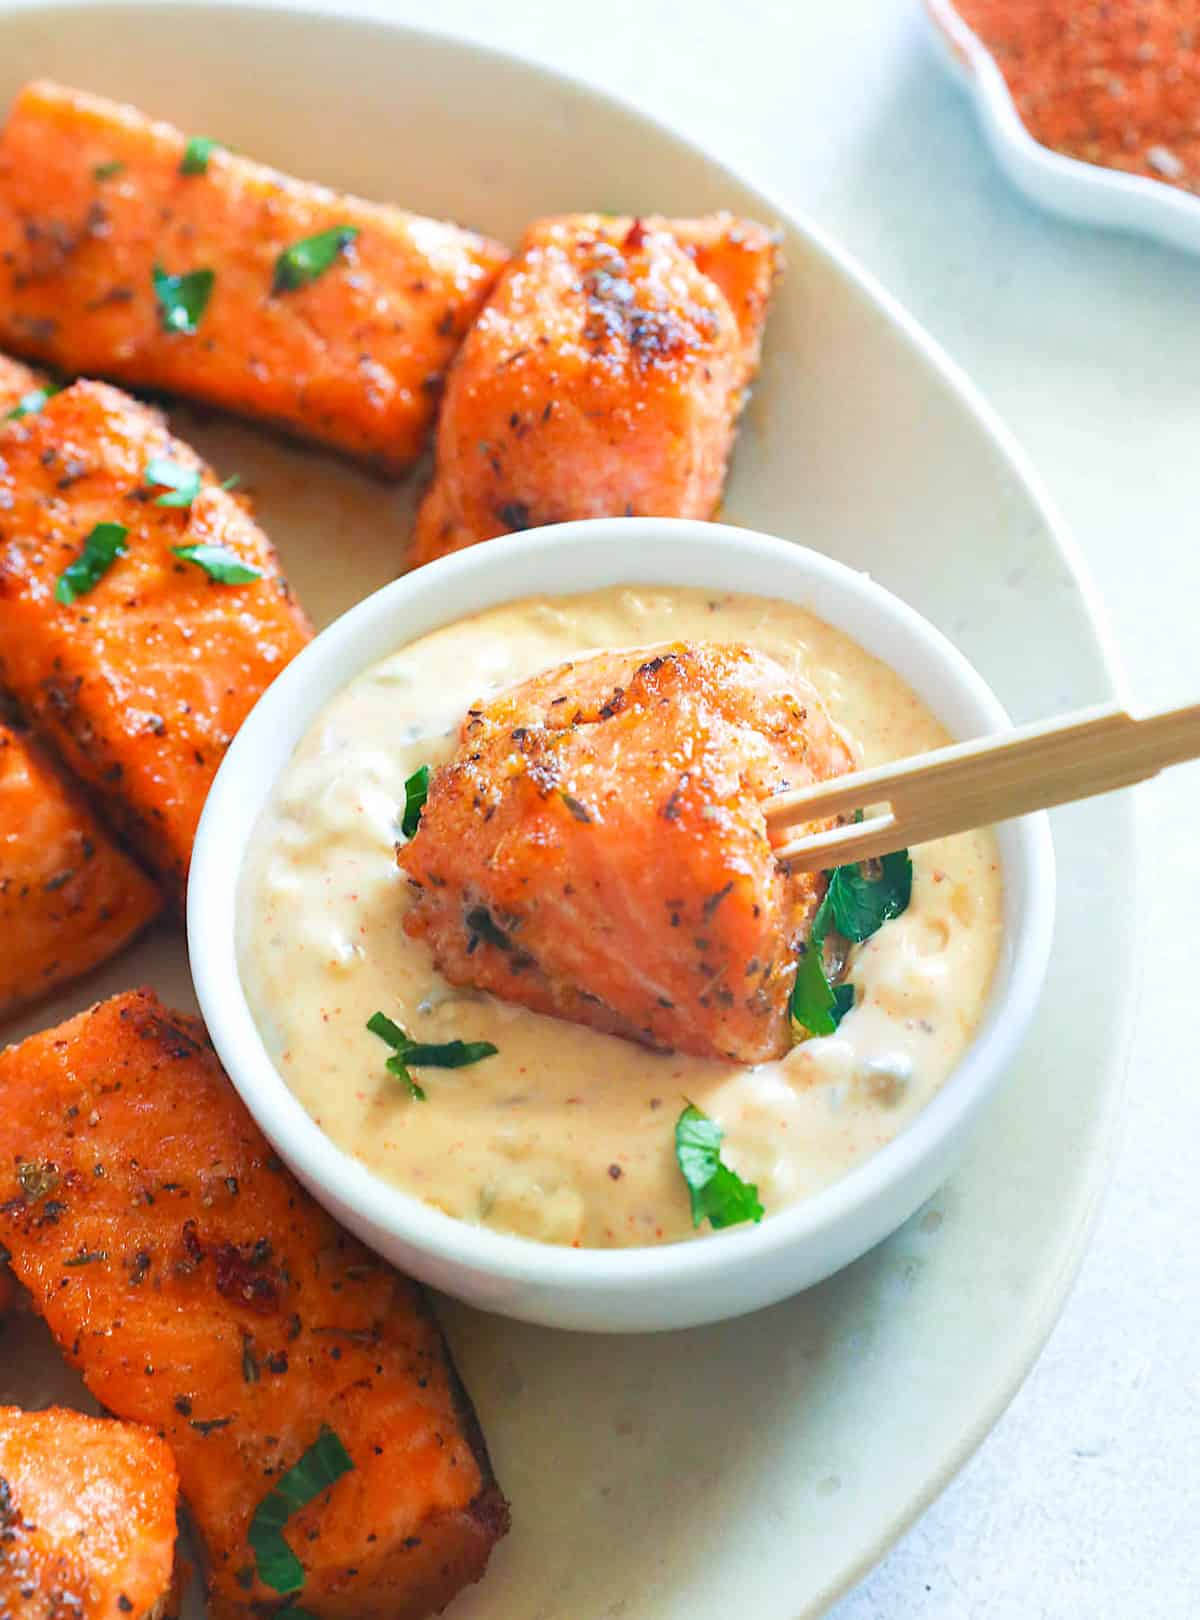 Dipping hot salmon bites in an amazing sauce